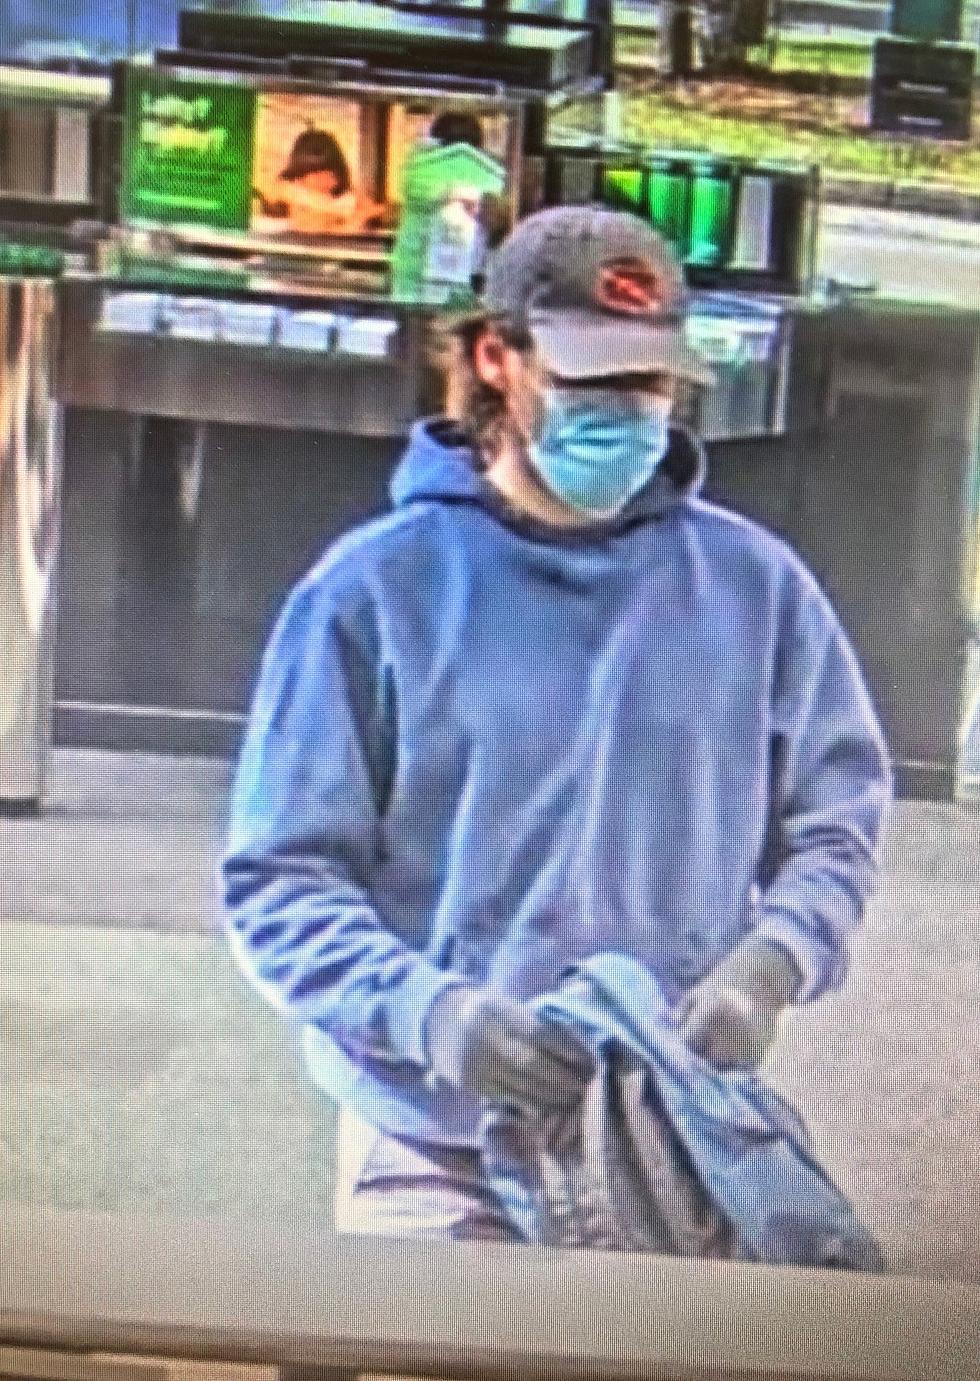 Police in Medford, NJ need your help finding bank robber